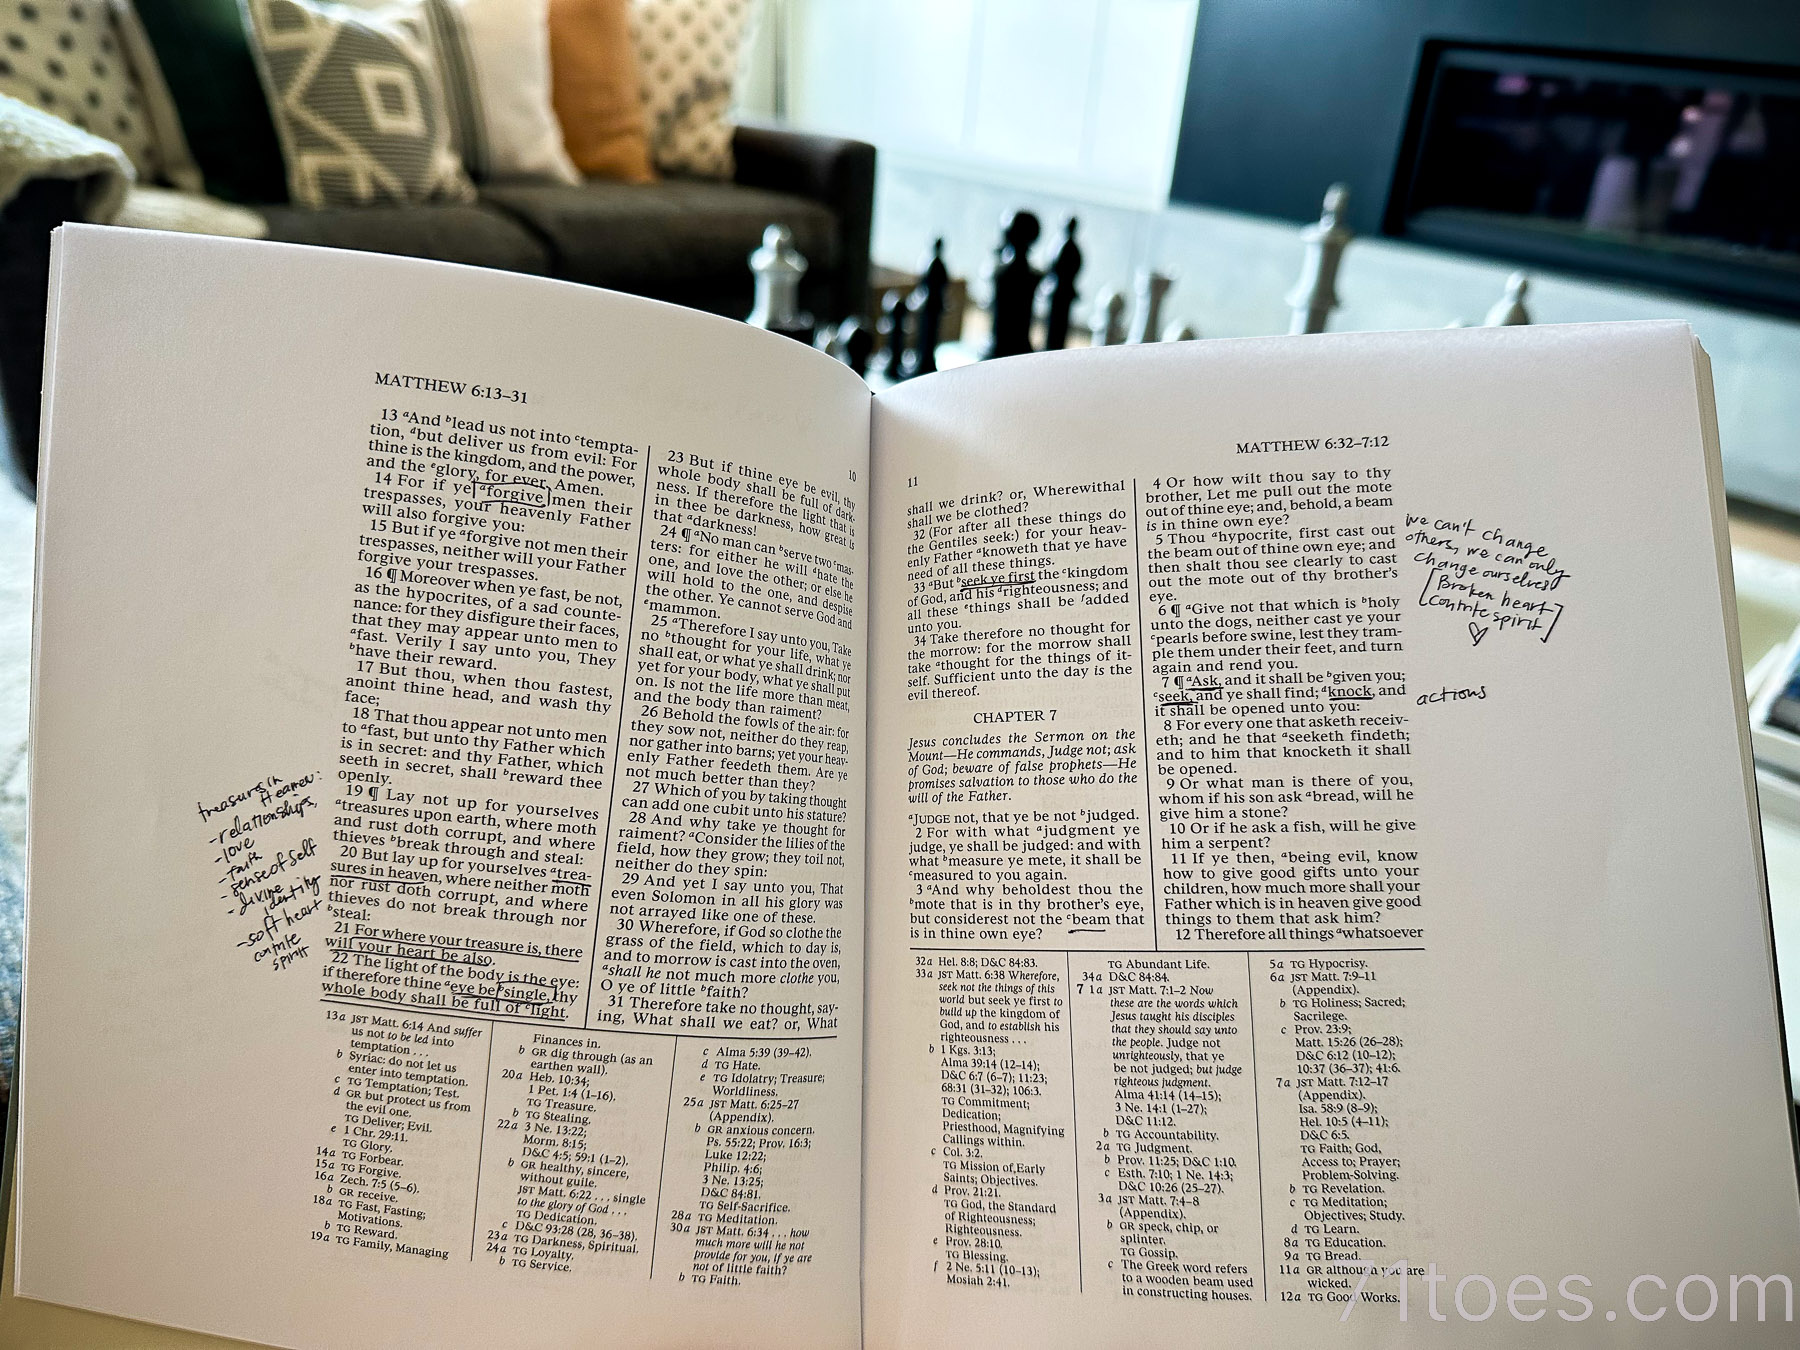 New Testament with notes written in the margins